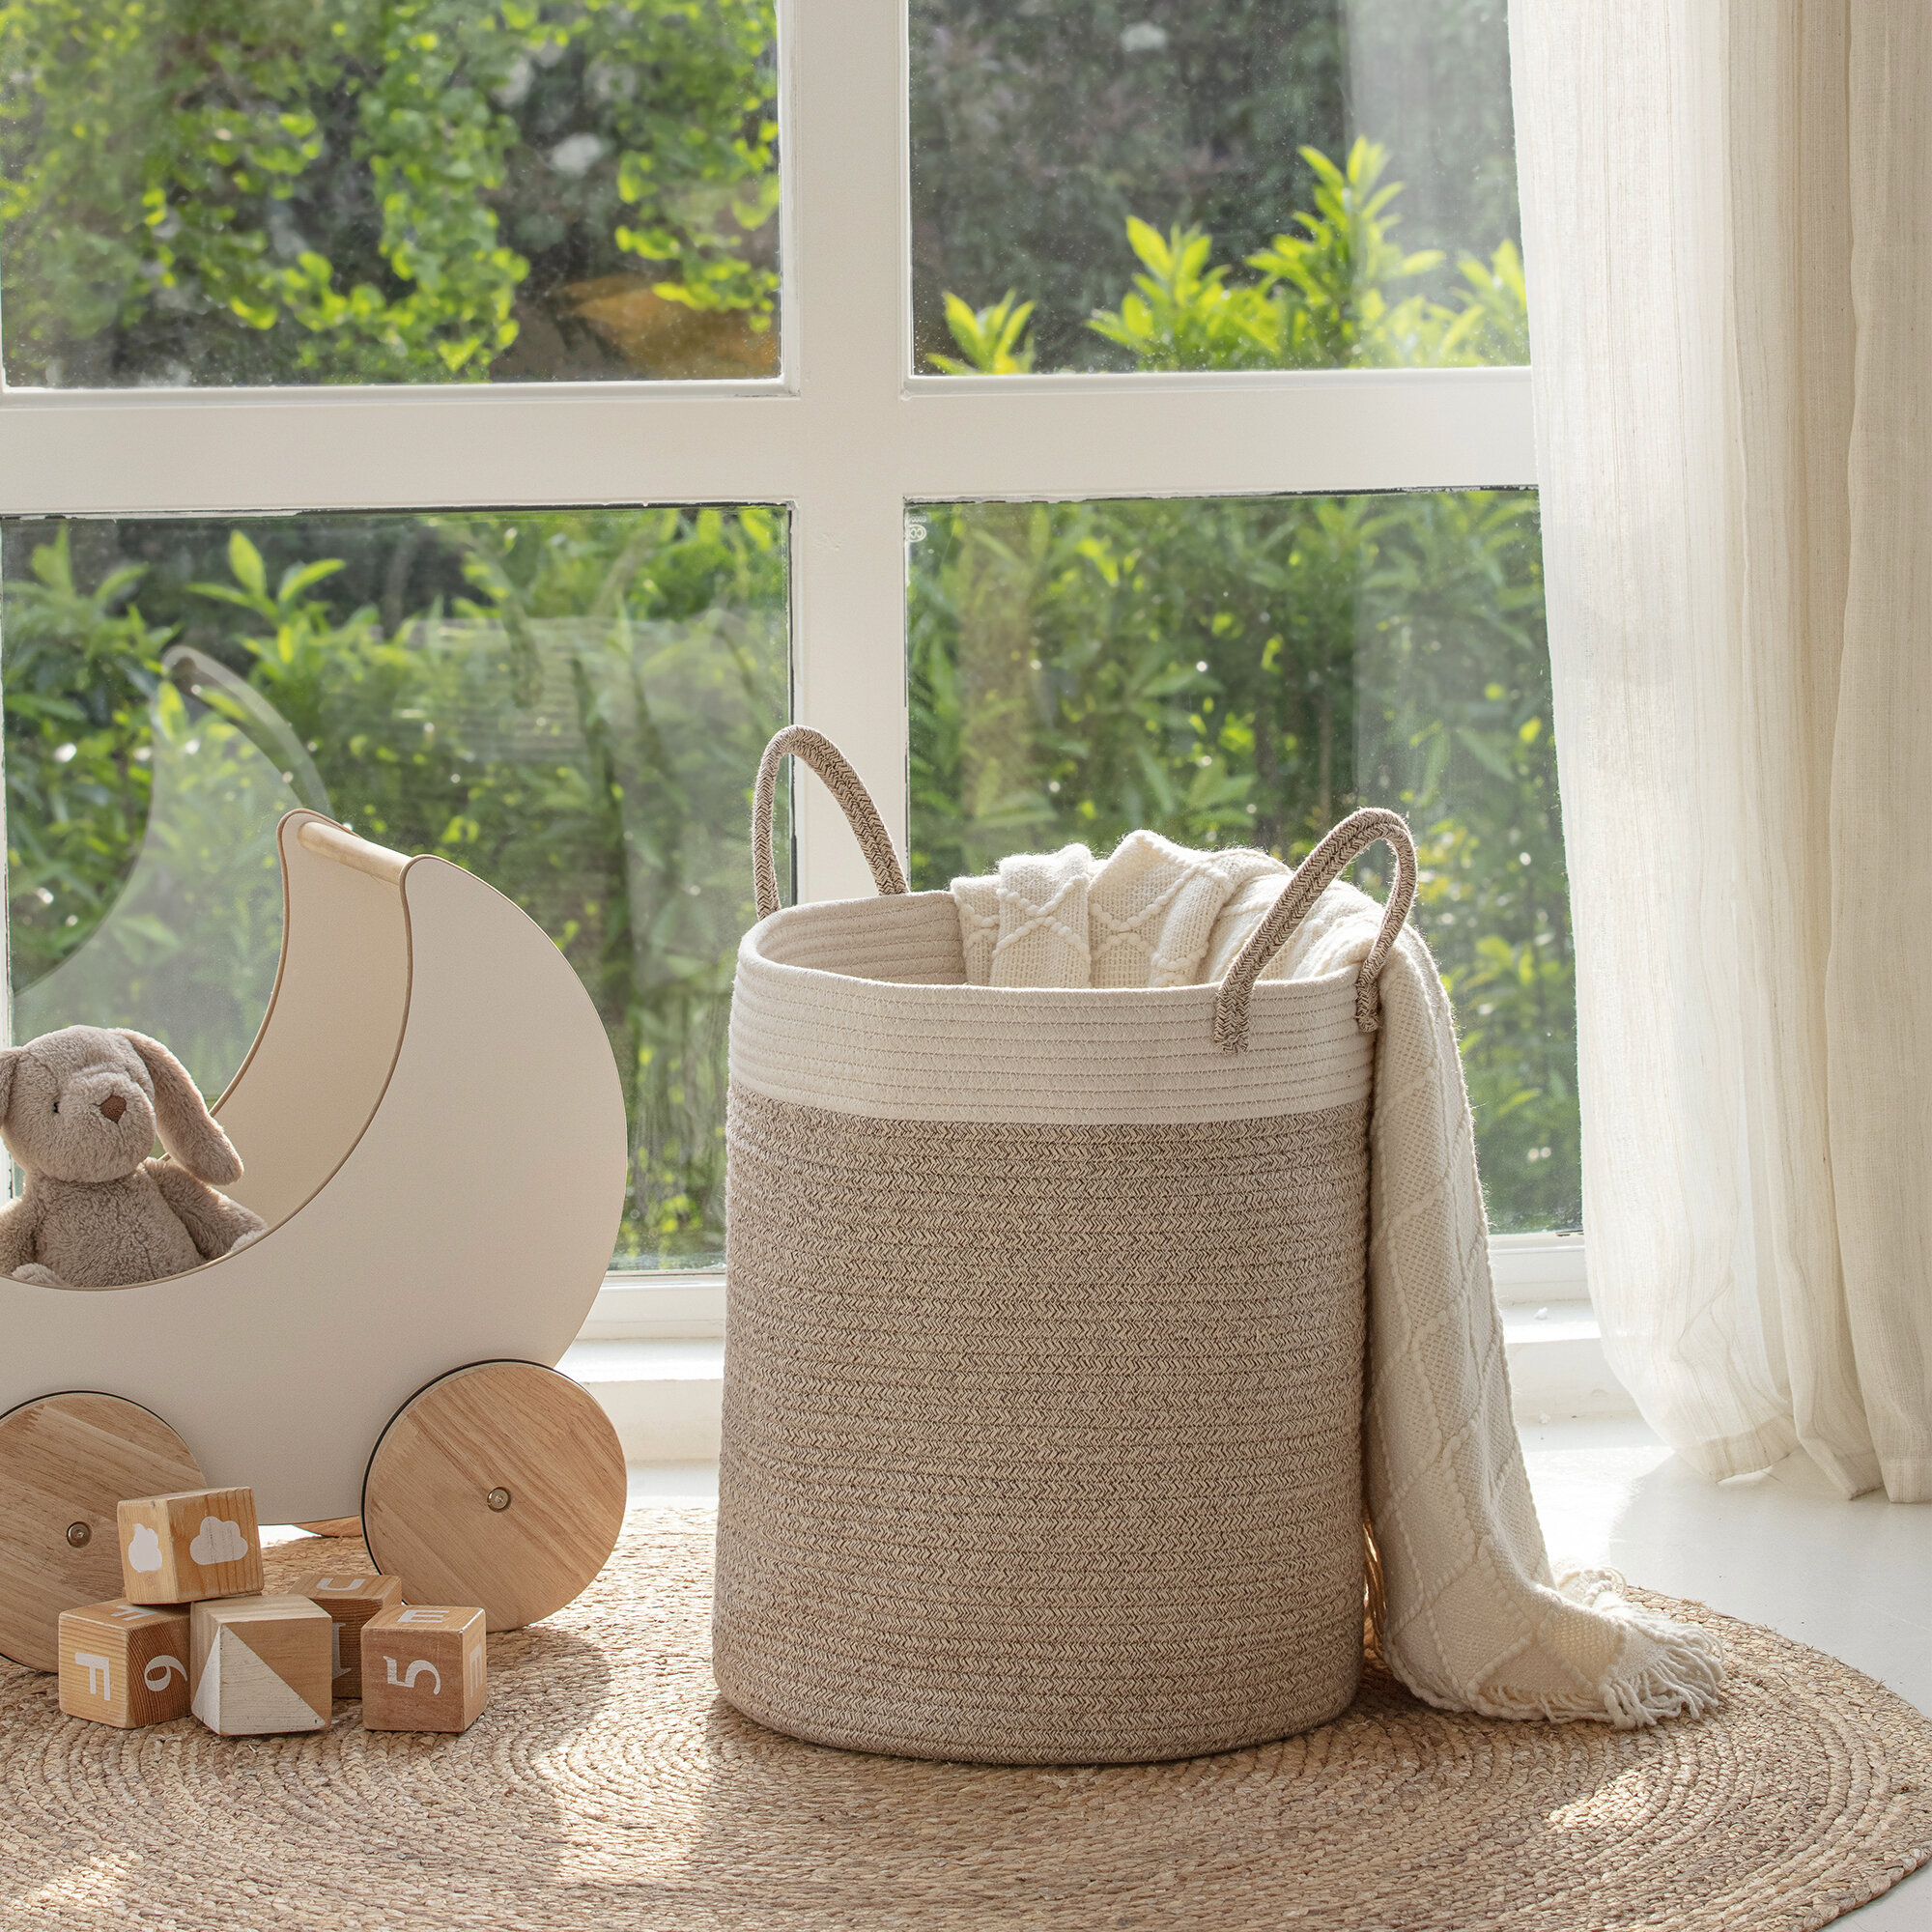 Fabric Dovecove | Wayfair Rope Storage & Reviews Althoff Basket